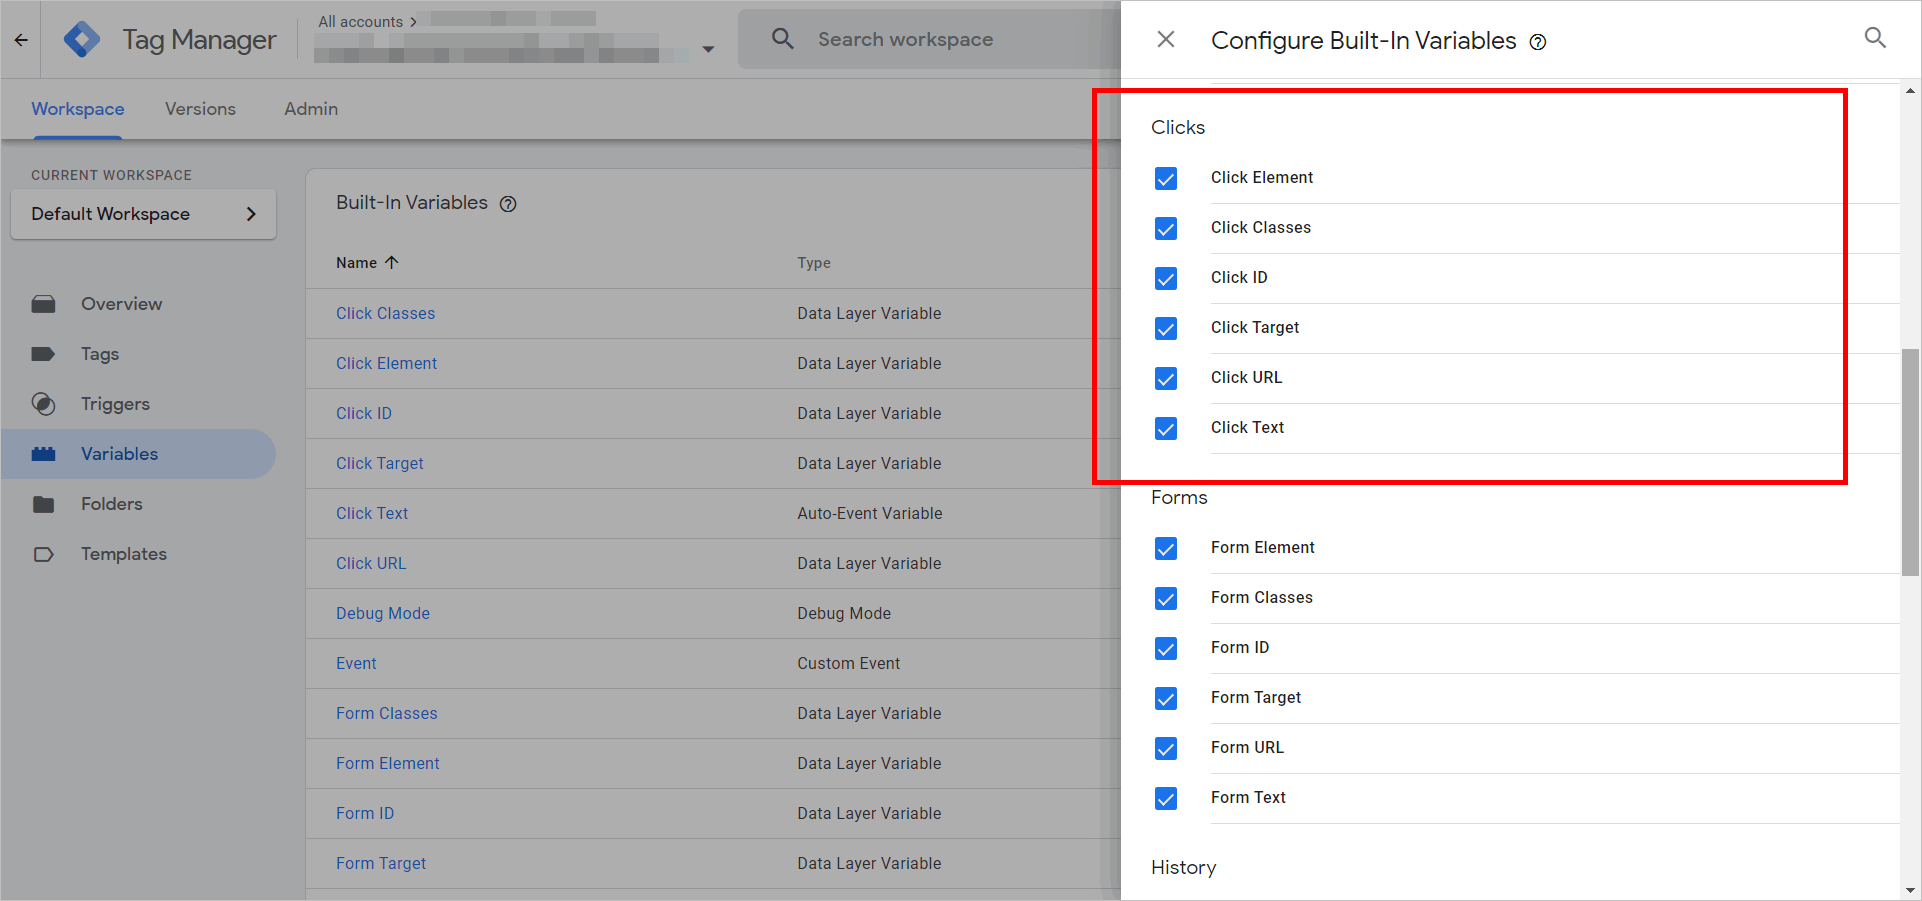 configure built-in variables panel with the clicks variables checkboxes ticked and highlighted